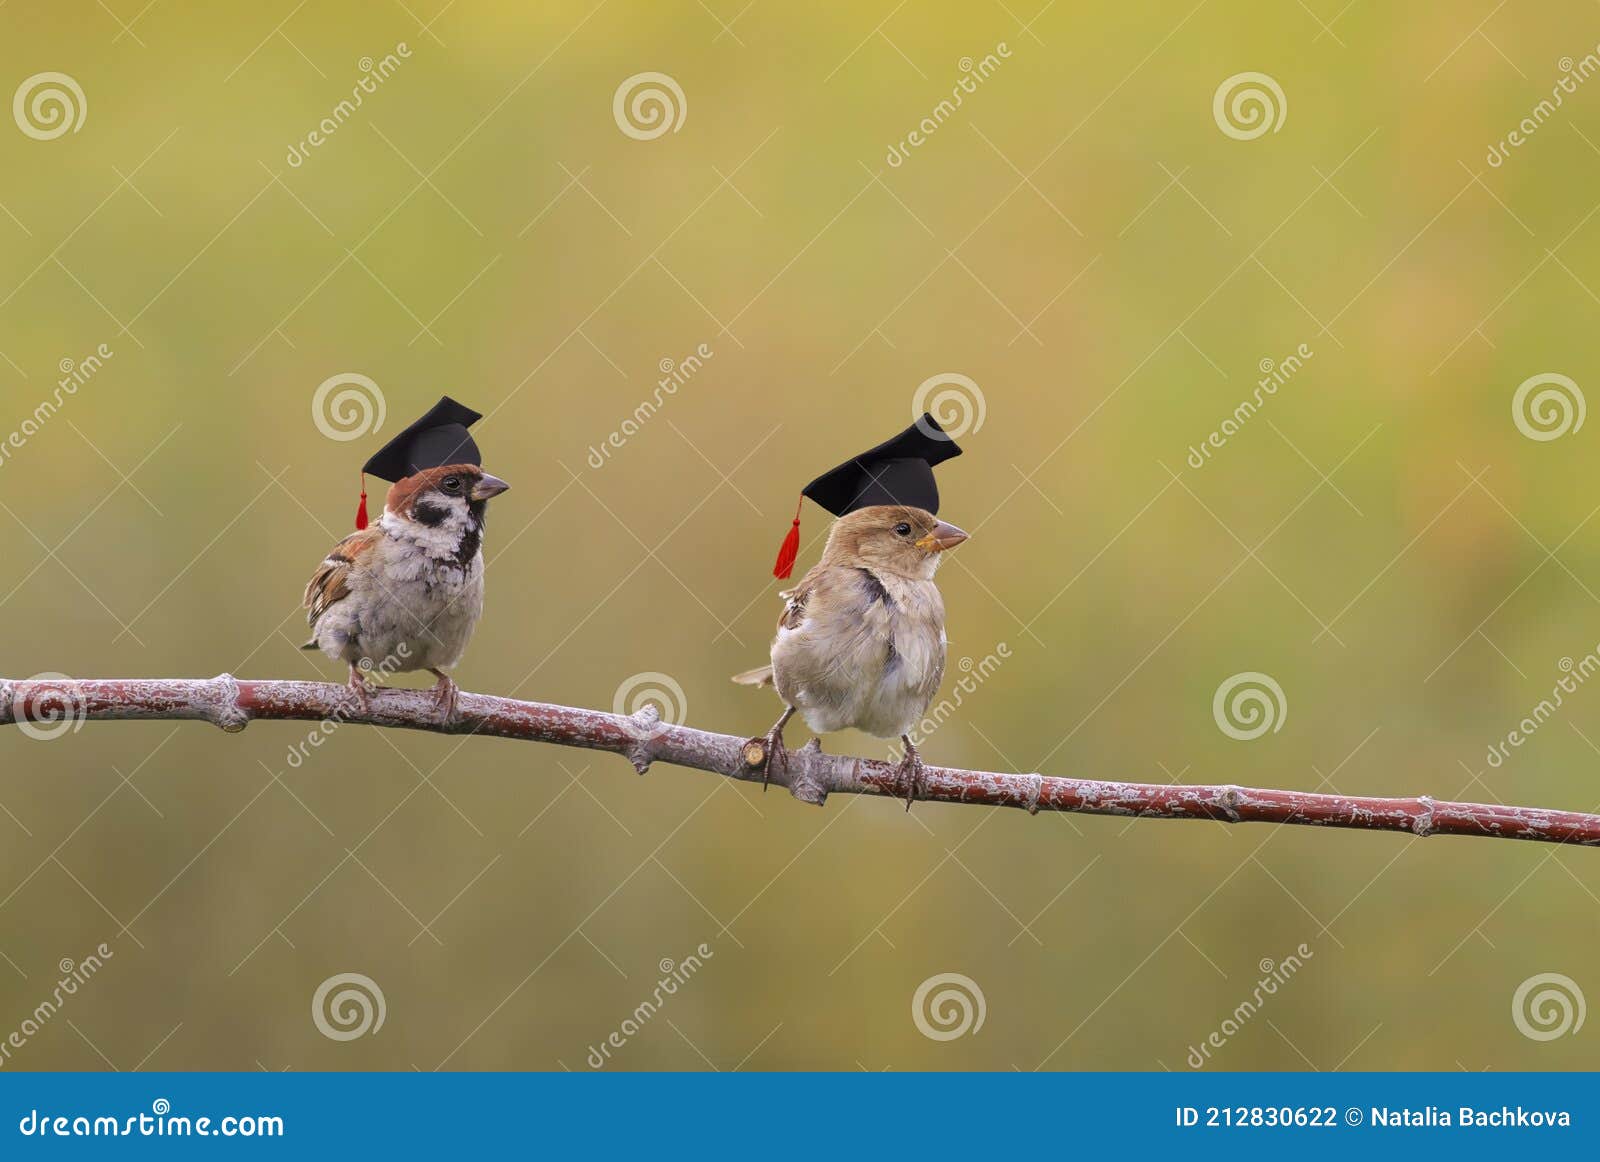 two little funny sparrow birds are sitting in the spring garden in the student hats of the confederacy